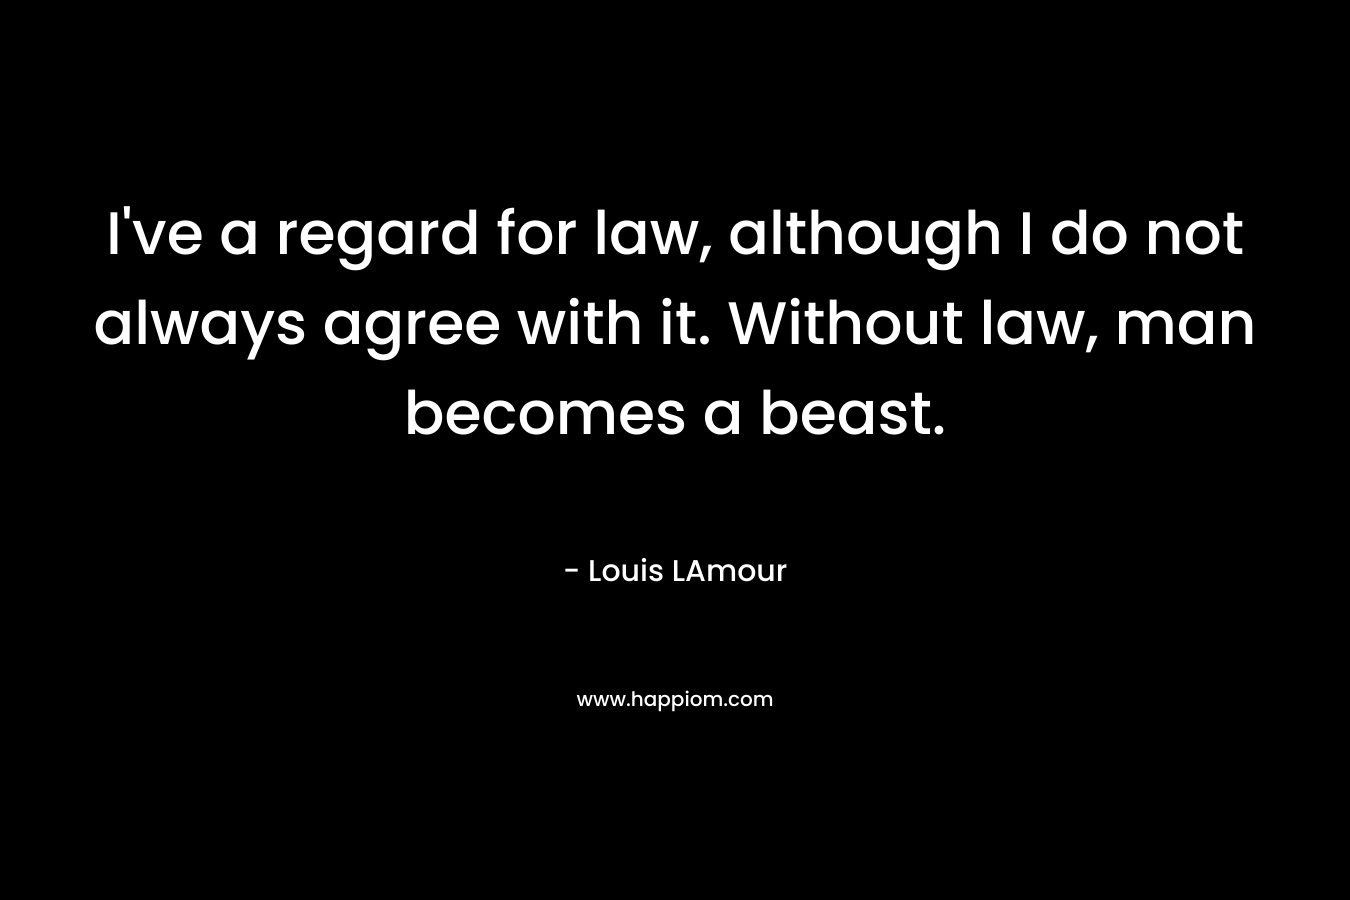 I've a regard for law, although I do not always agree with it. Without law, man becomes a beast.